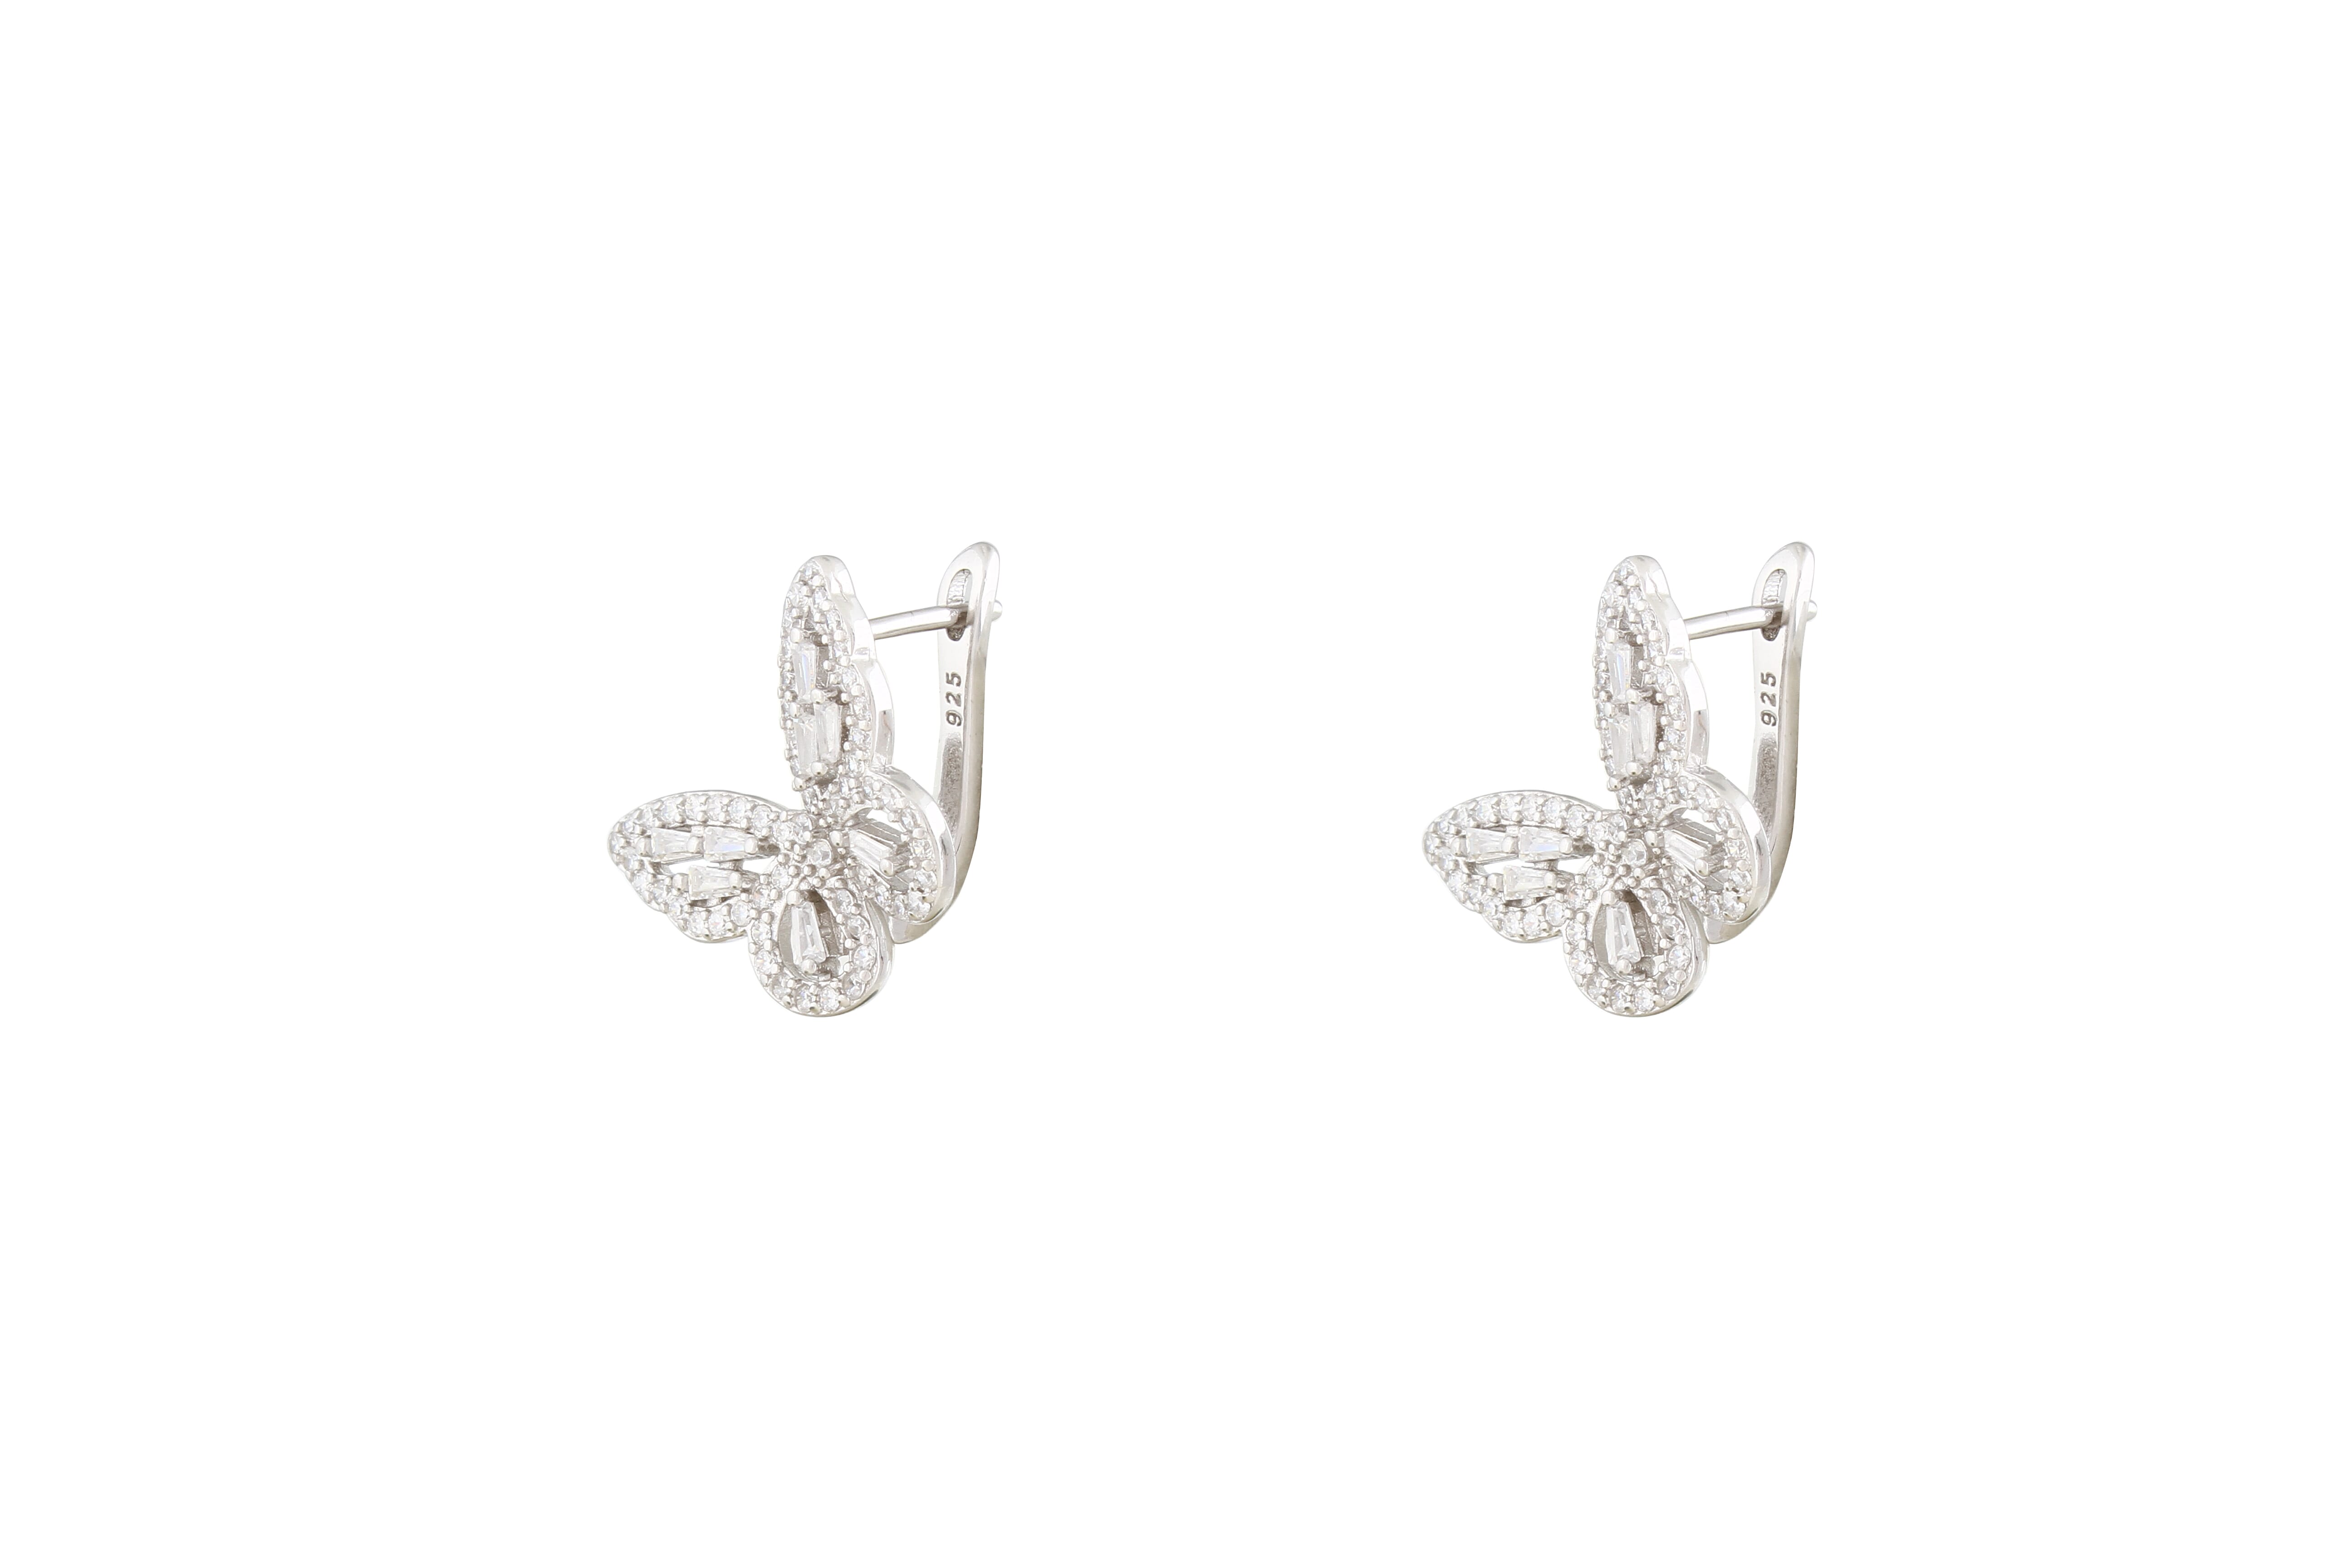 Asfour Crystal Clips Earrings With Butterfly Design In 925 Sterling Silver ER0465